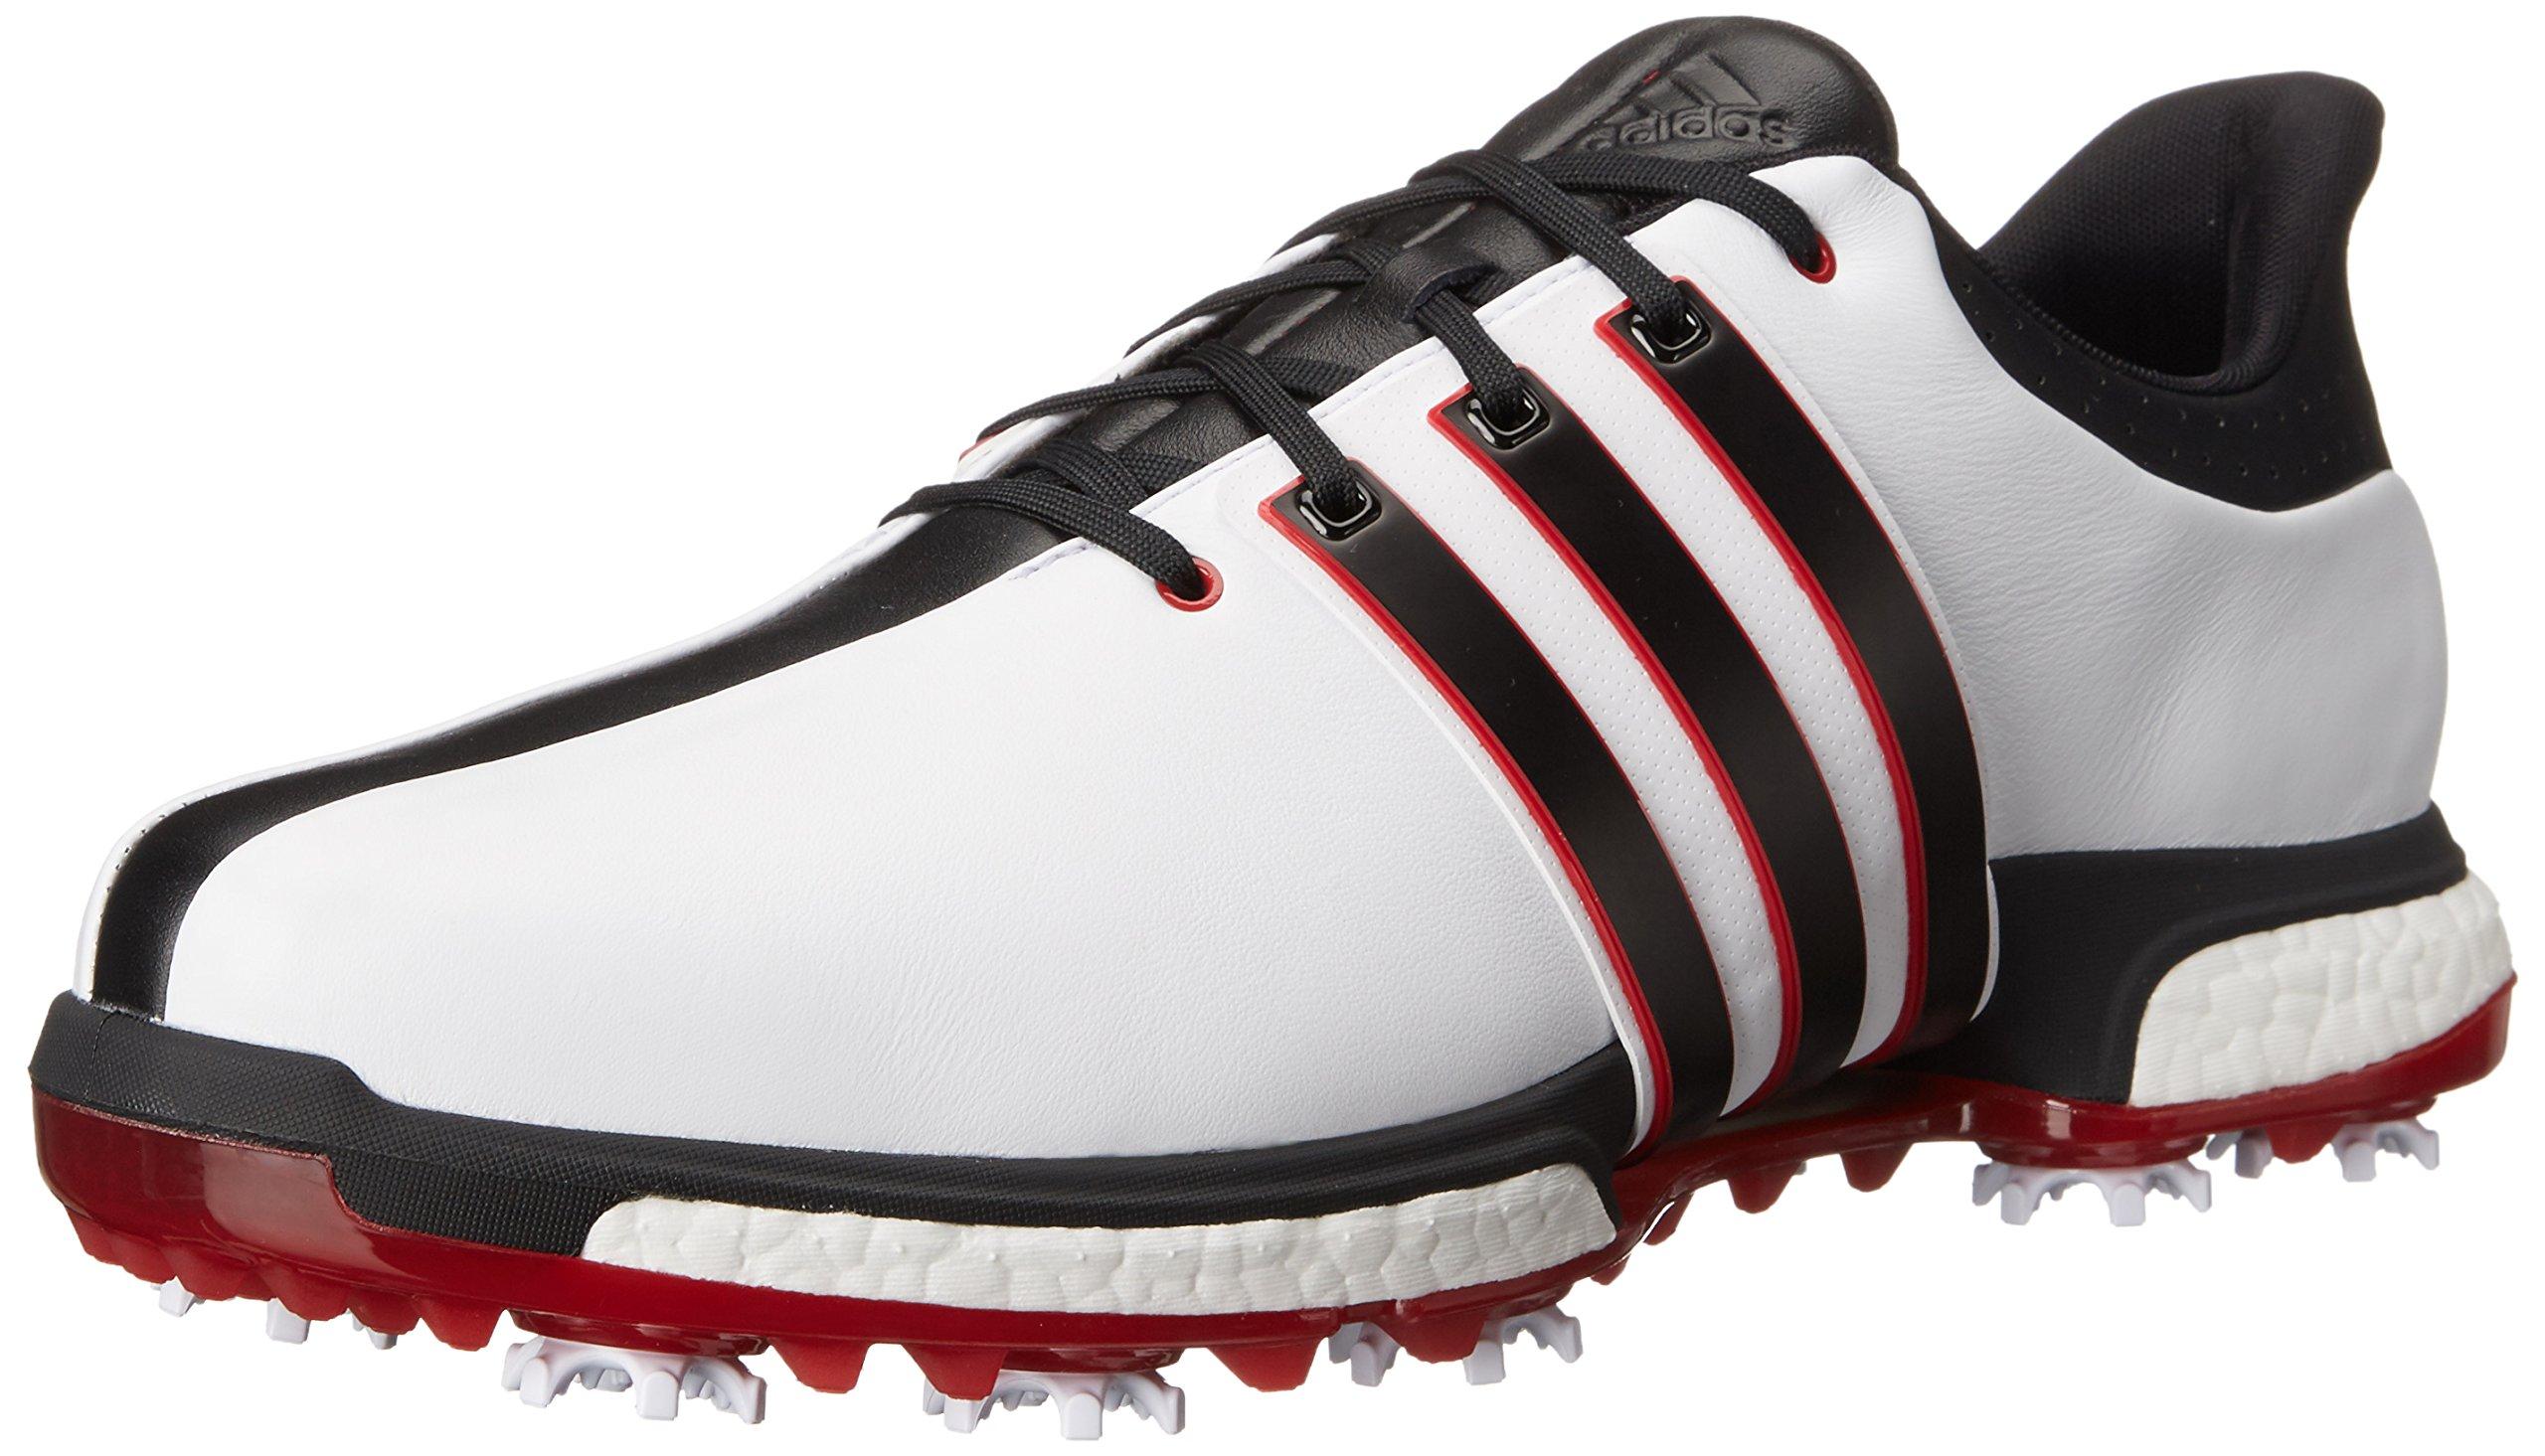 adidas Golf S Tour360 Boost Spiked Shoe,white/black/power Red,11 Us for Men